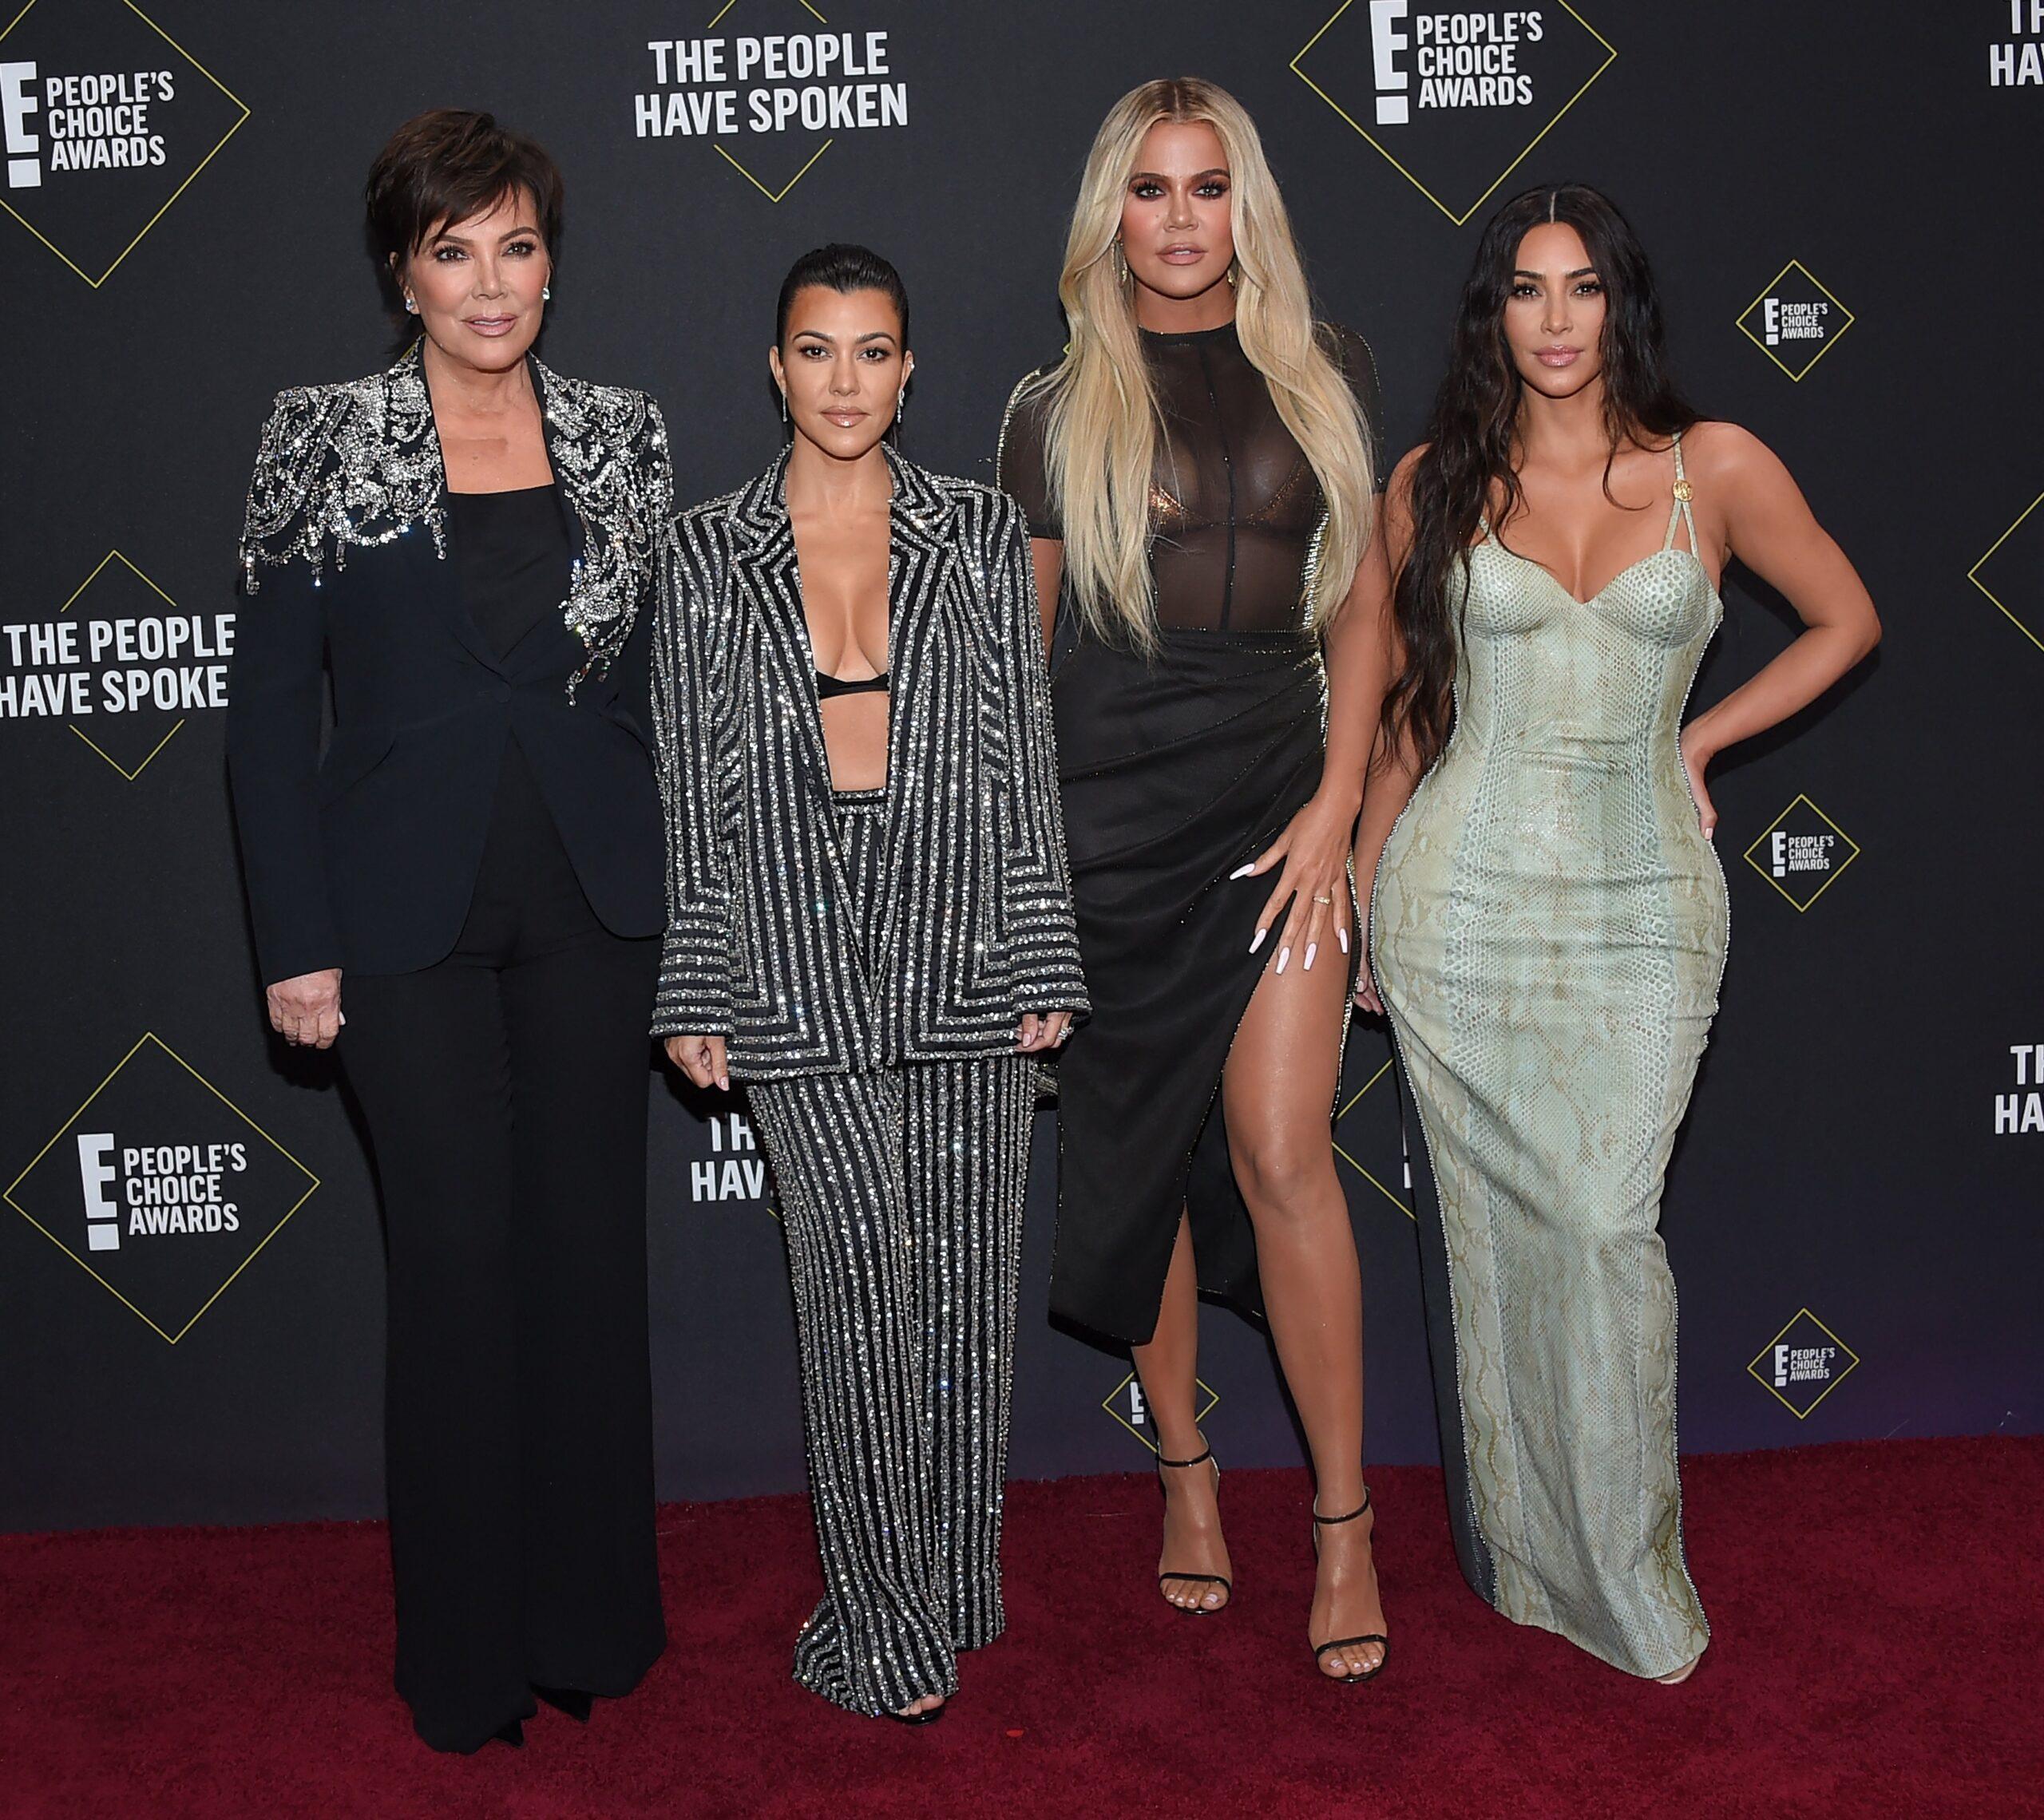 The Kardashians attend the 2019 E! People's Choice Awards